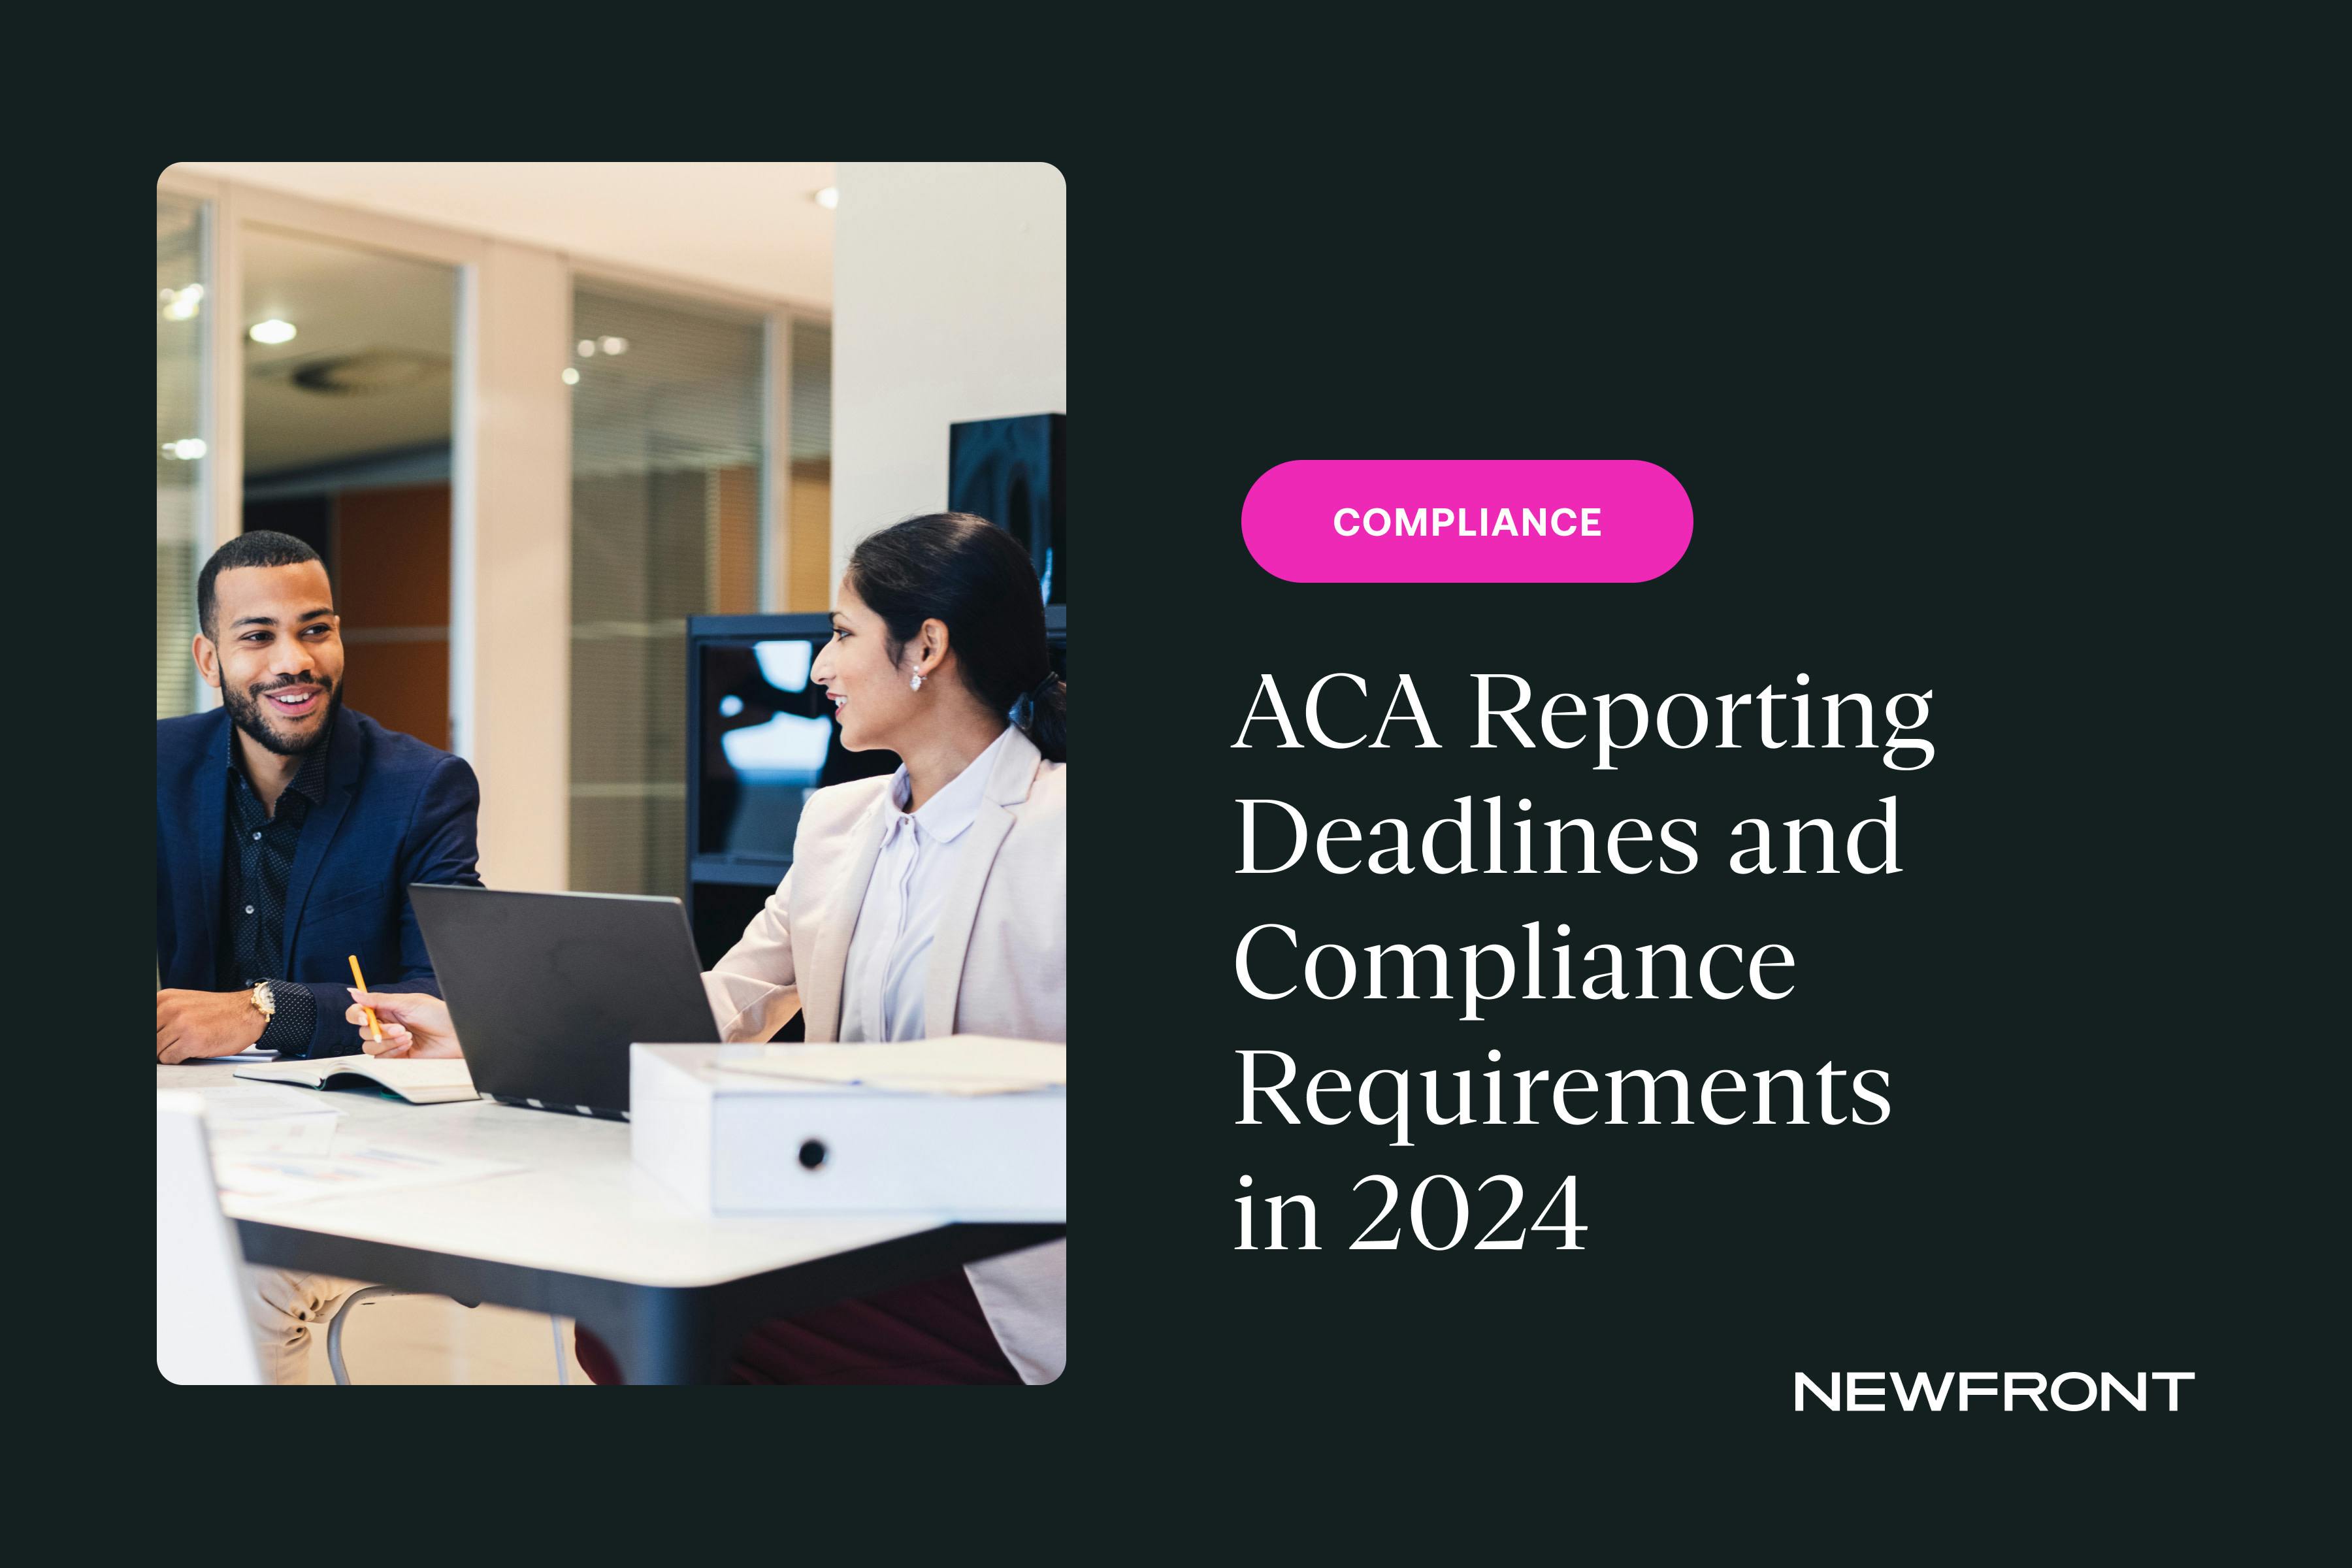 ACA Reporting Deadlines and Compliance Requirements in 2024